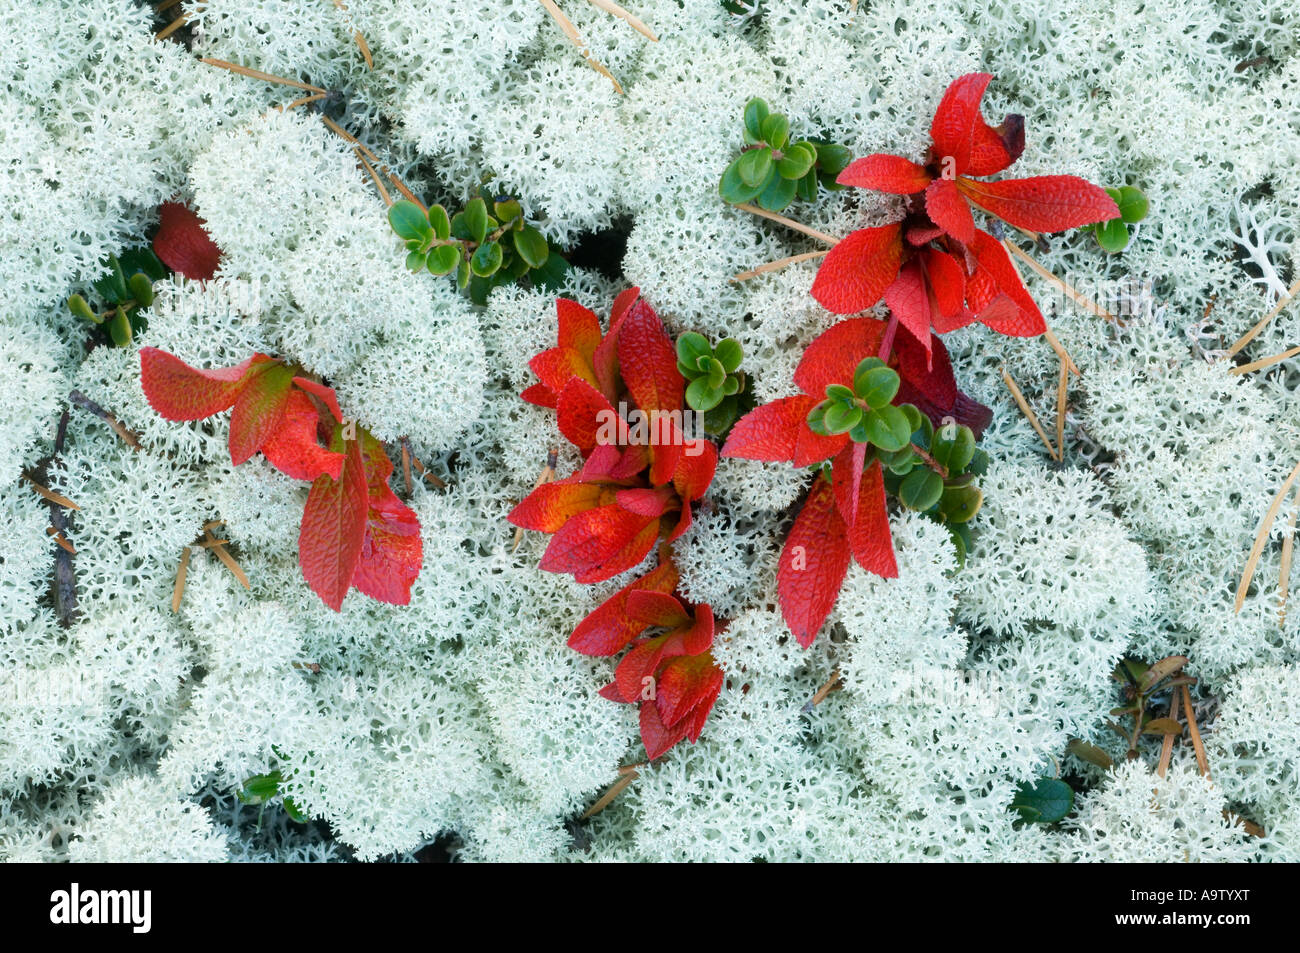 Black bearberry leaves amongst lichen Norway Stock Photo